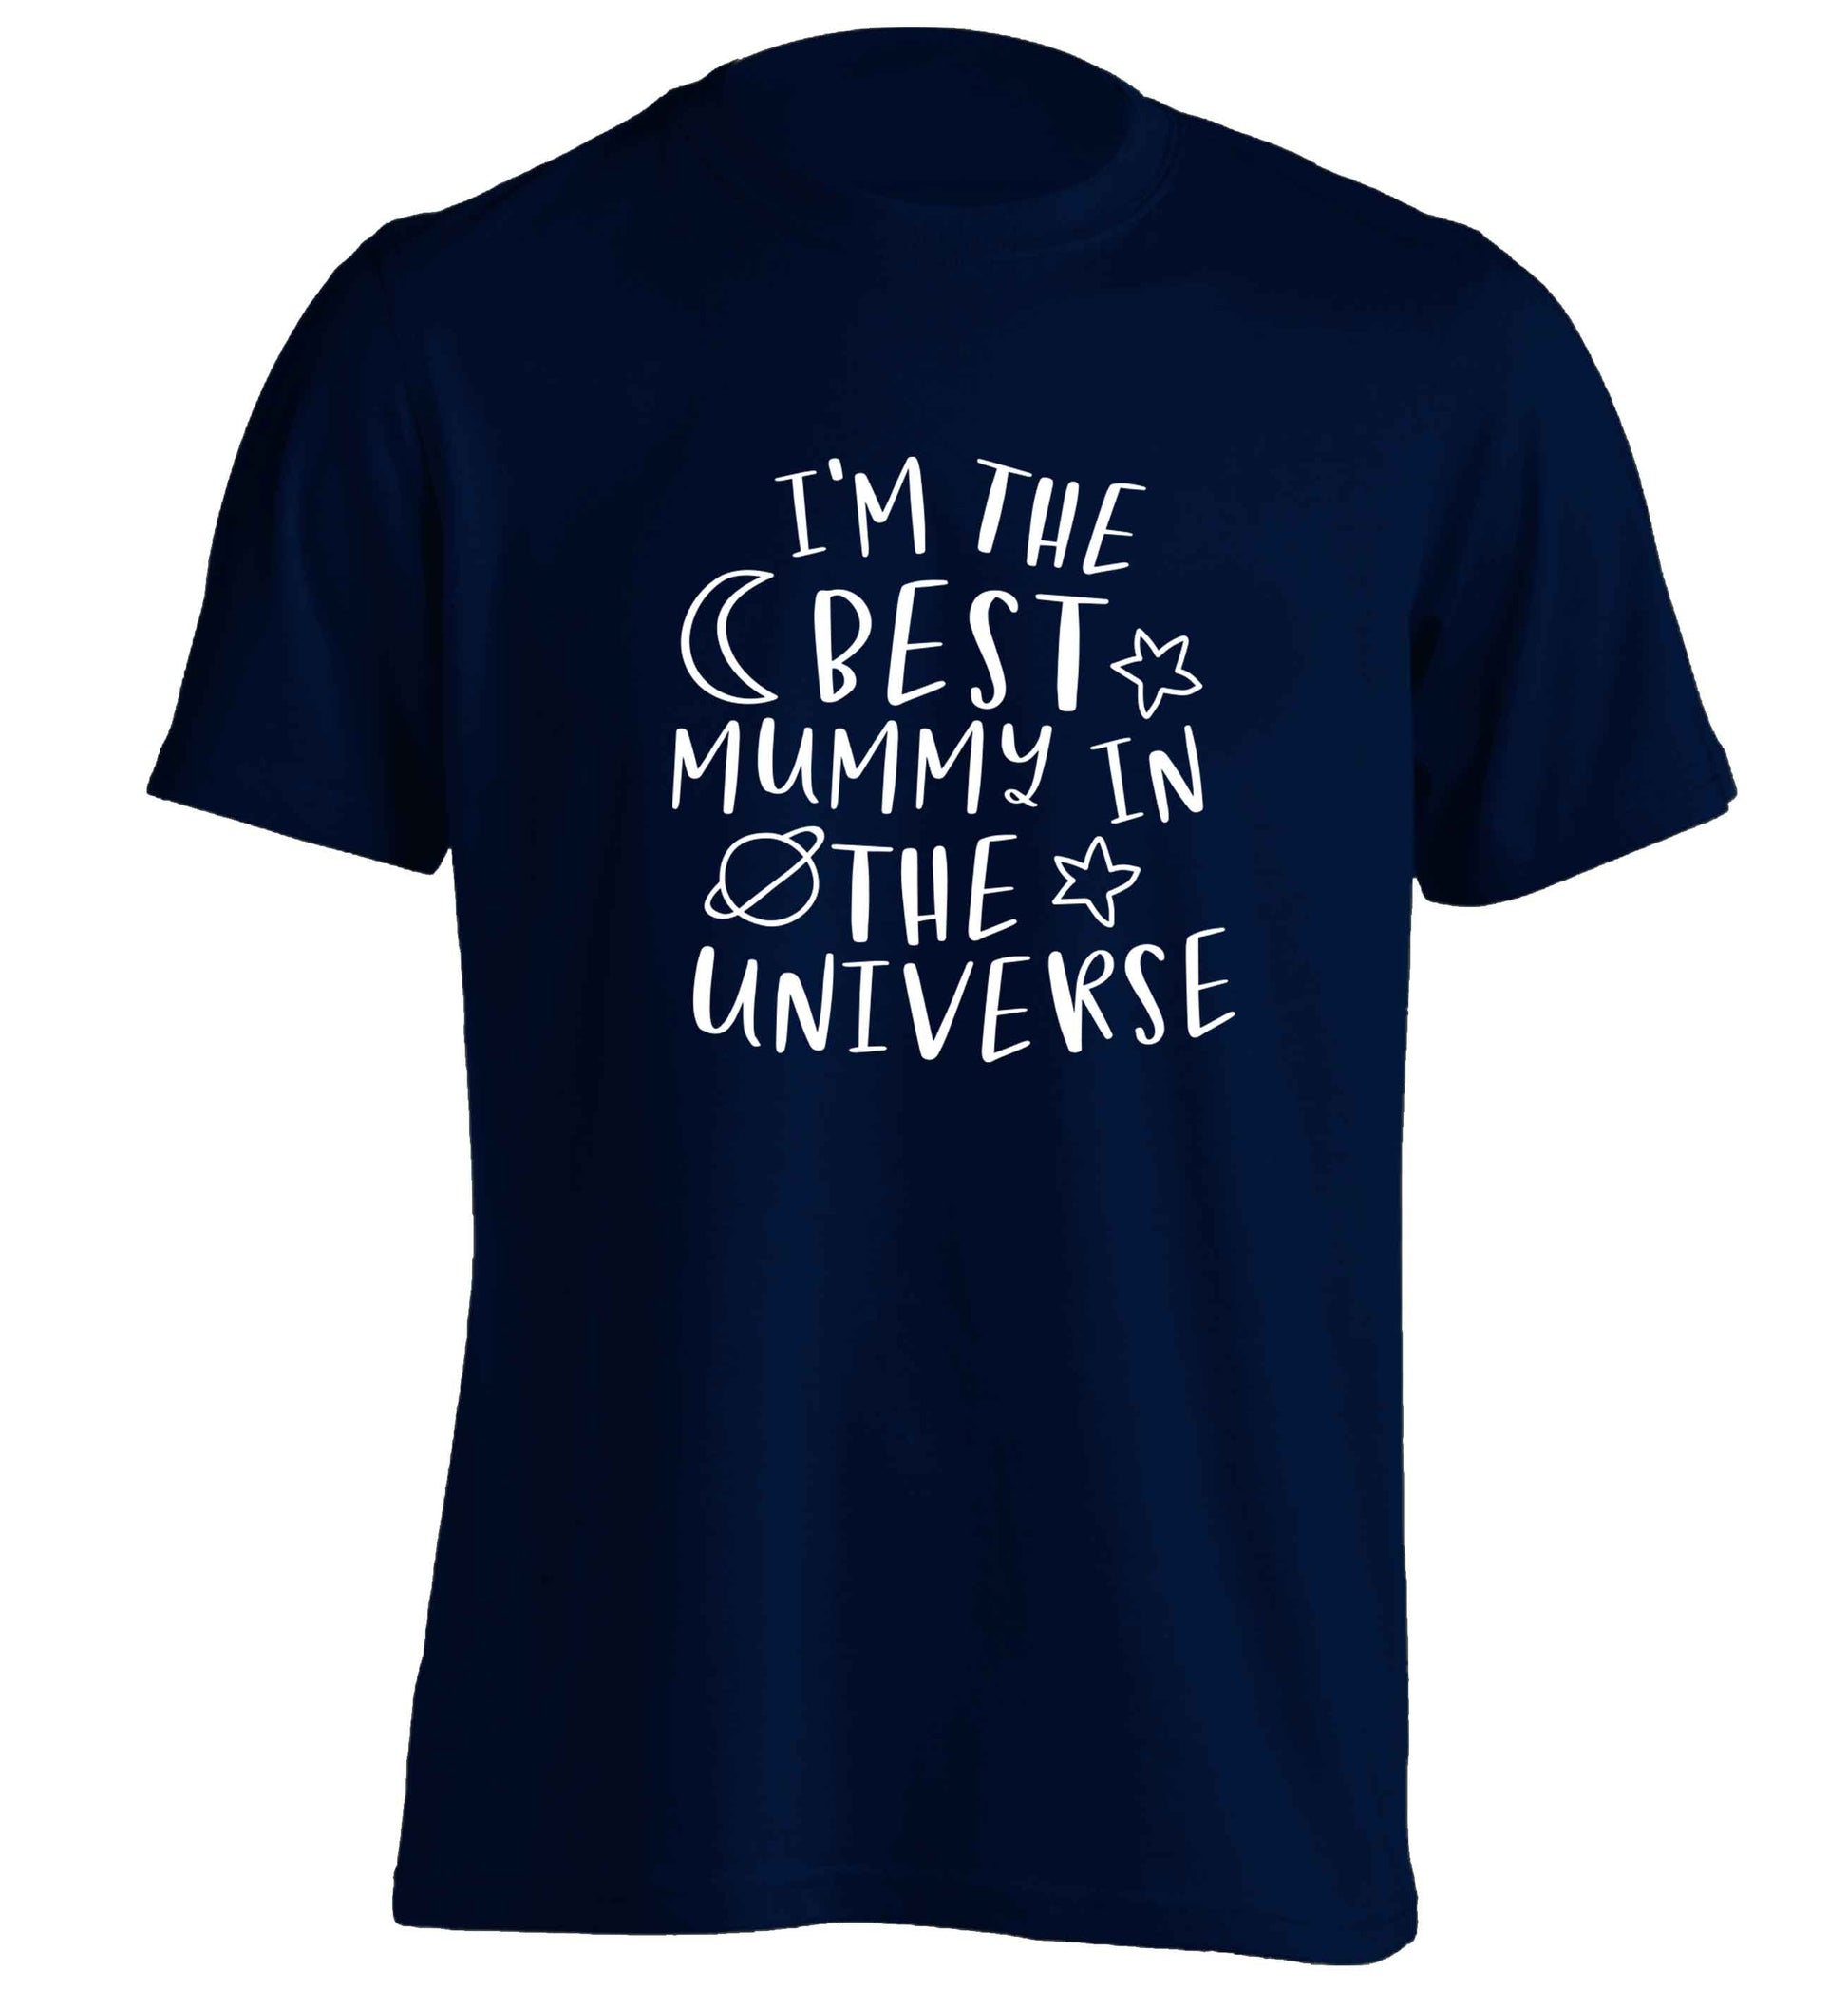 I'm the best mummy in the universe adults unisex navy Tshirt 2XL